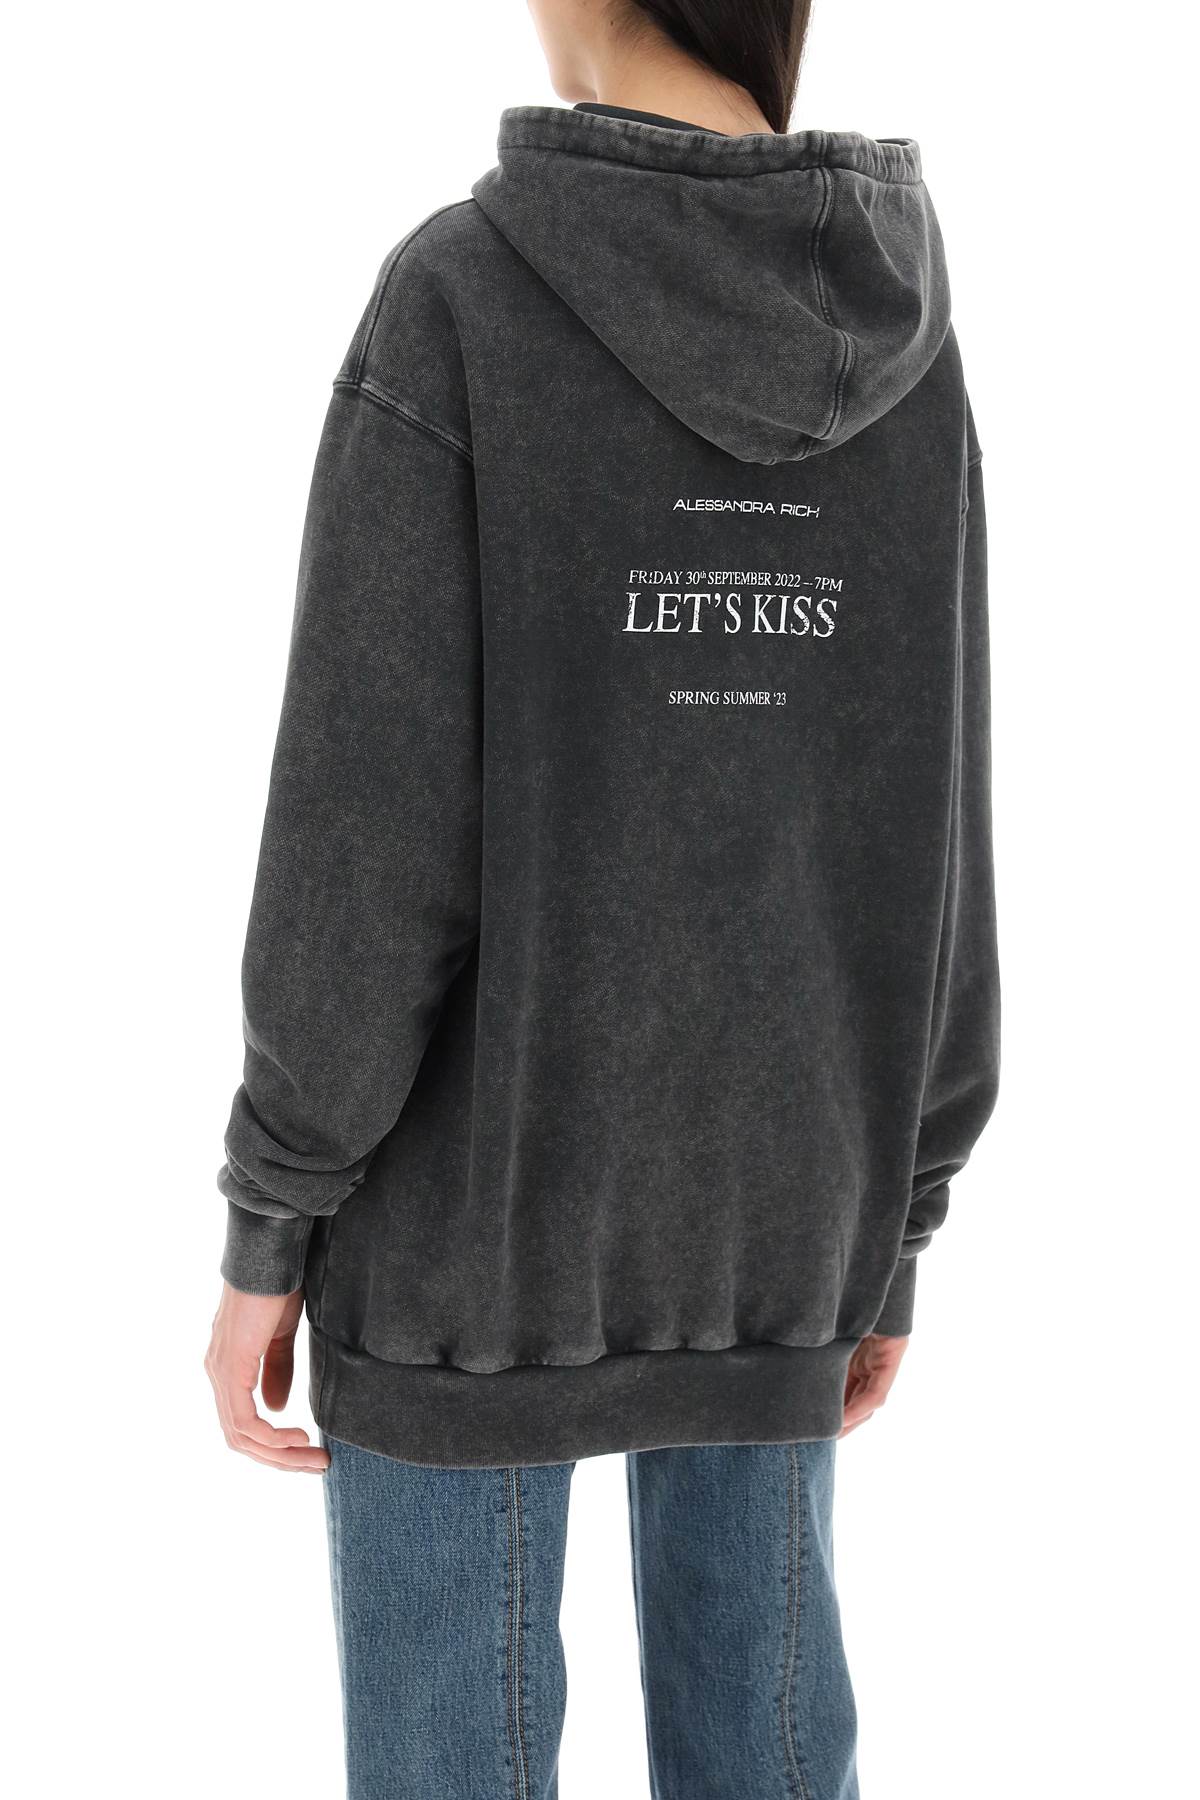 Alessandra rich let's kiss hoodie-2